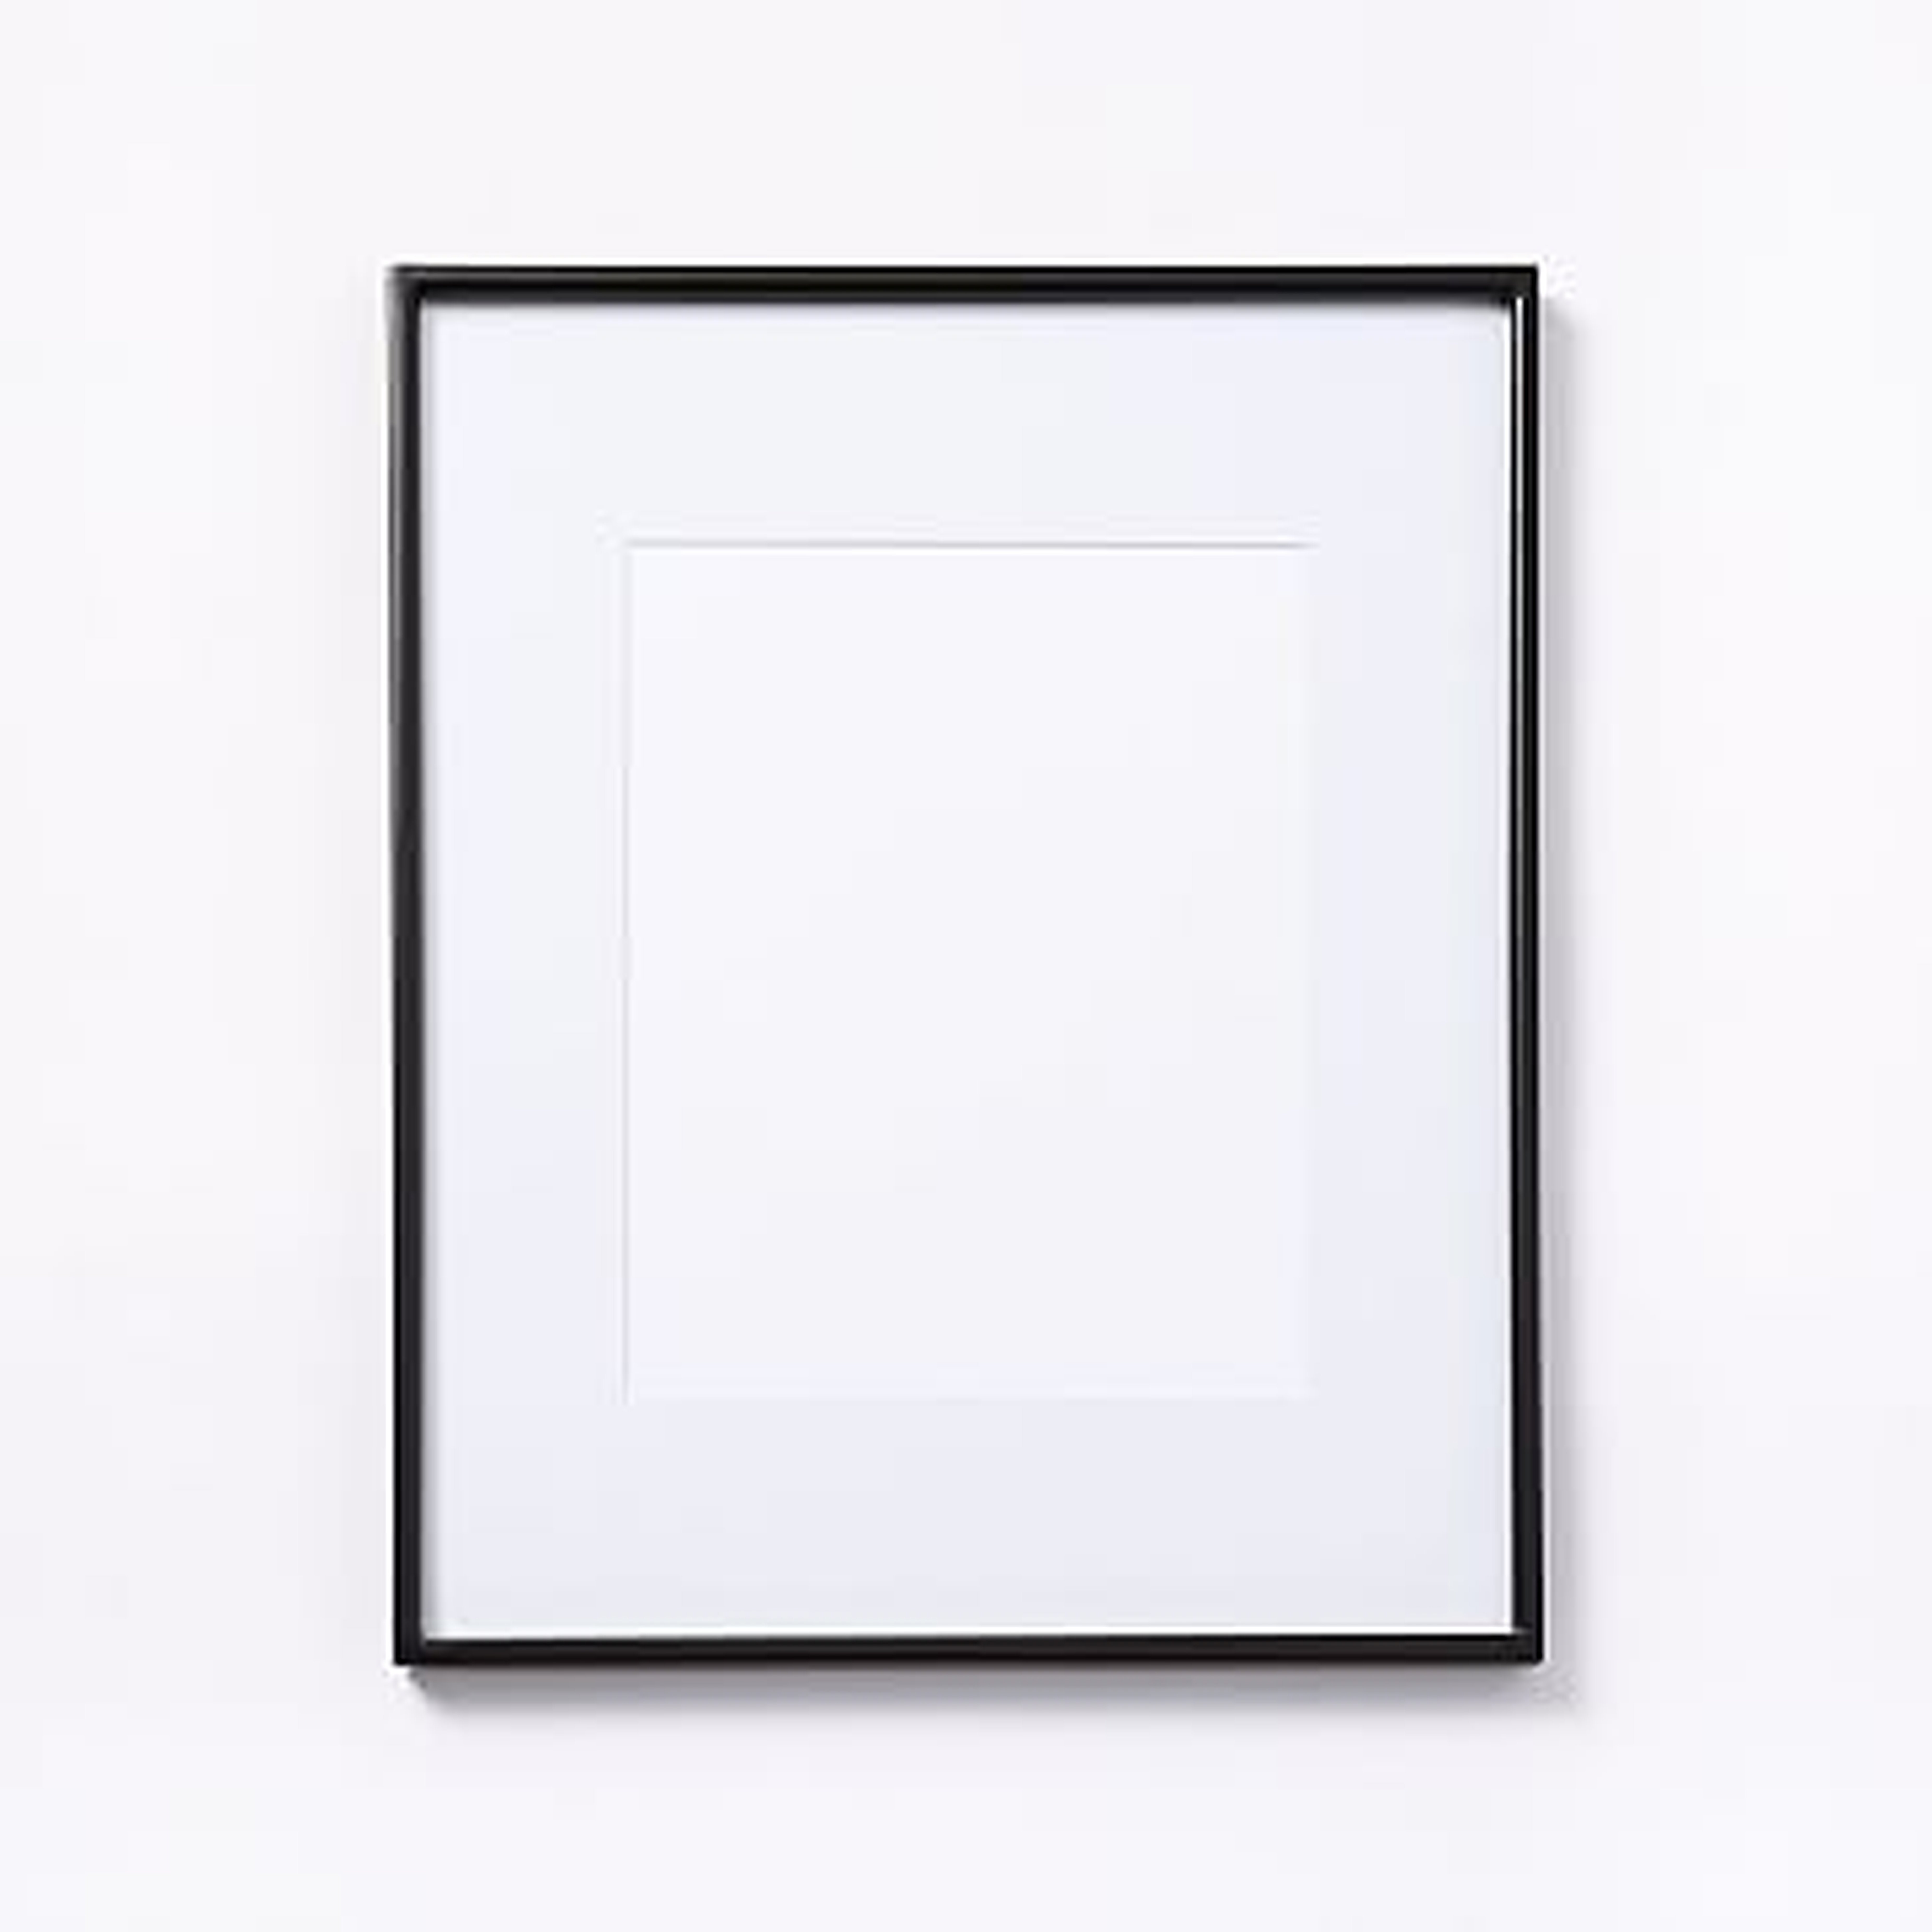 Gallery Frame, Antique Bronze, 8" x 10" (13" x 16" without mat) - West Elm